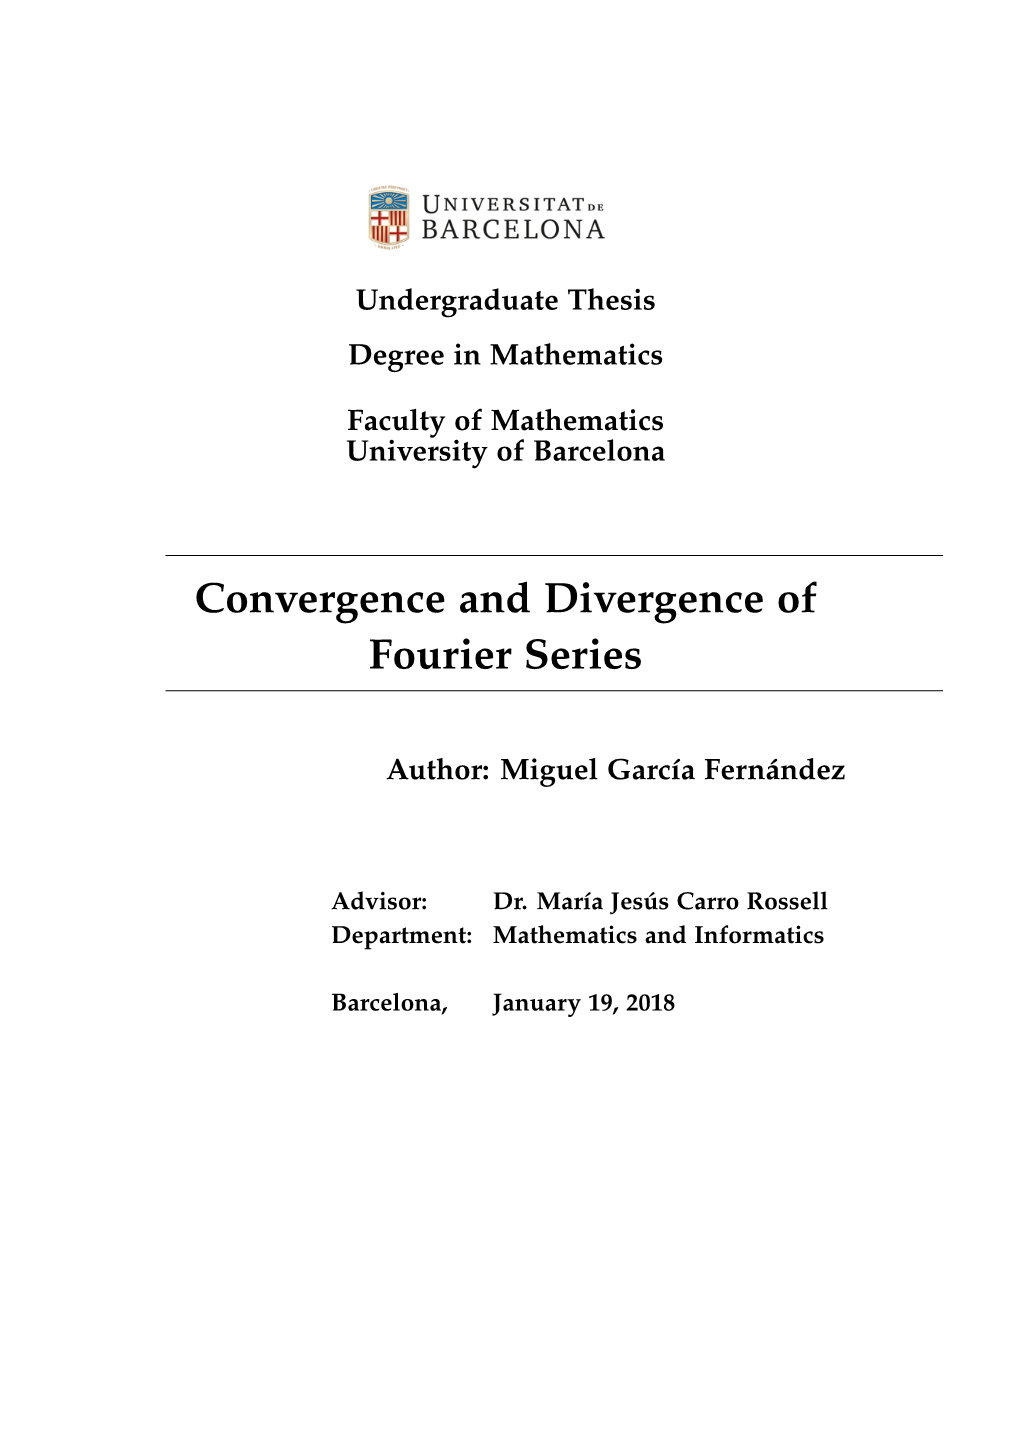 Convergence and Divergence of Fourier Series